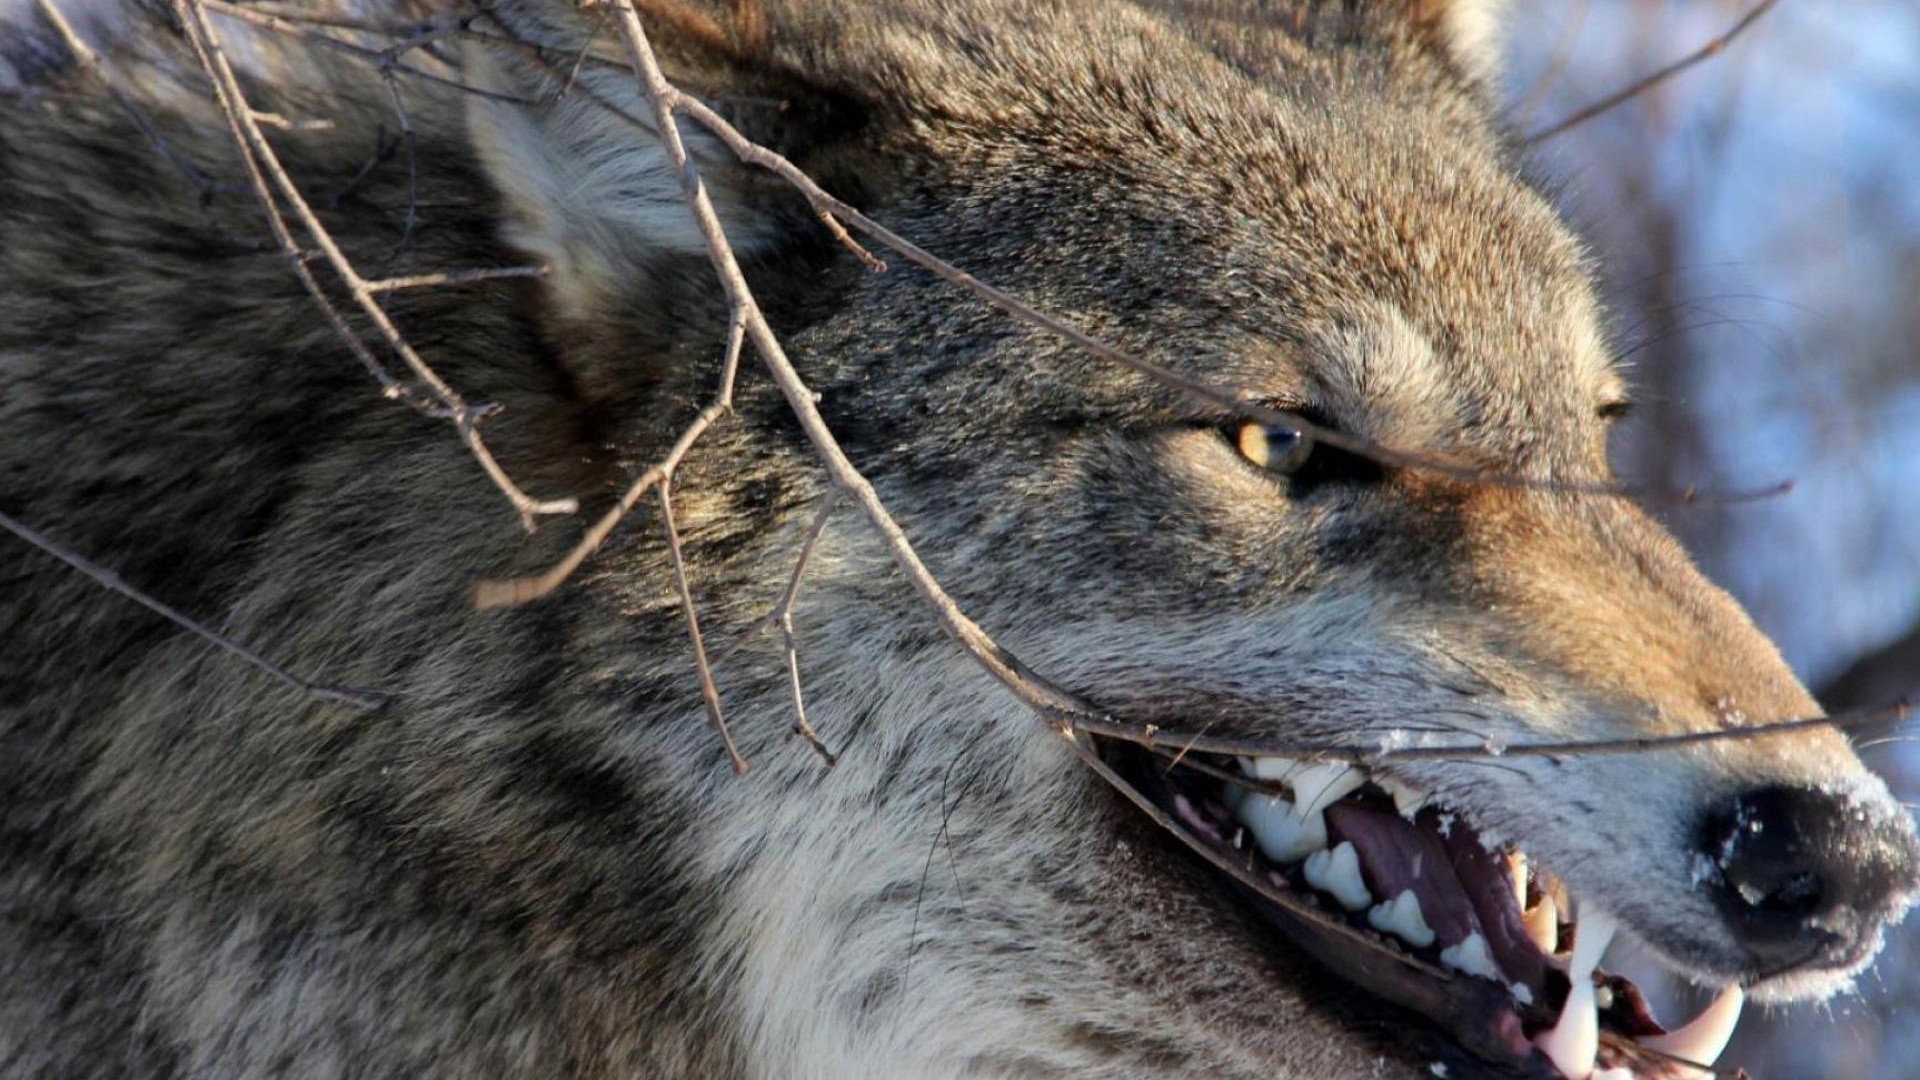 1920x1080 ... animals angry wolves 1600x1168 wallpaper High Quality Wallpapers .